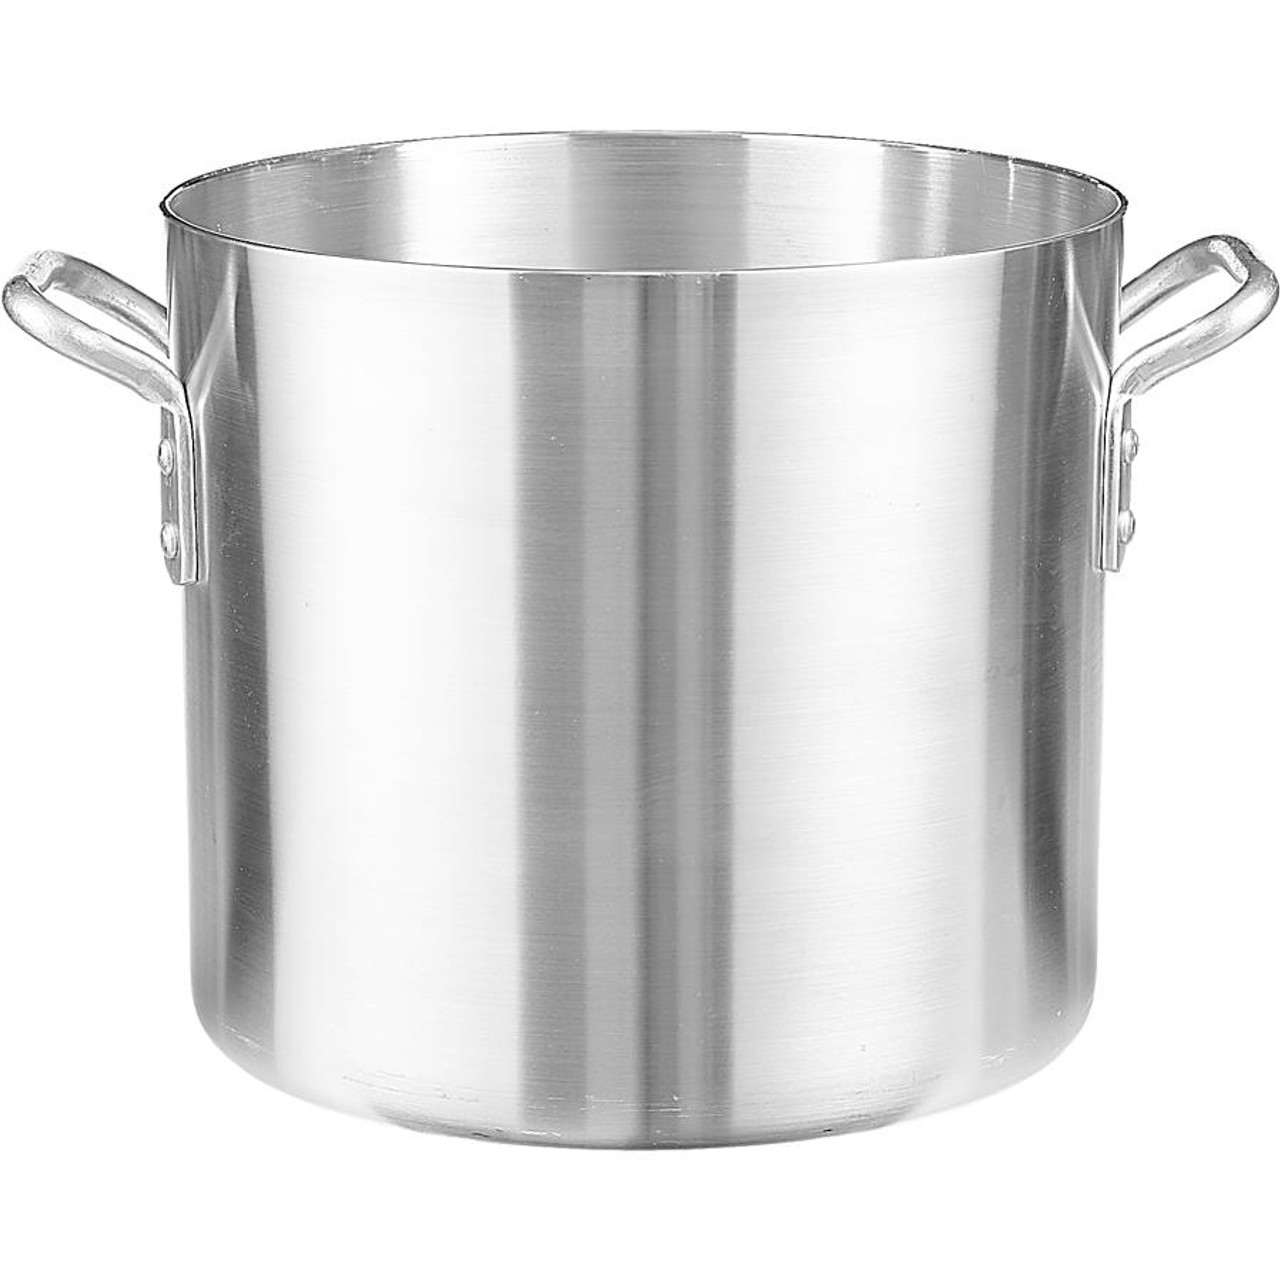 https://cdn11.bigcommerce.com/s-g5ygv2at8j/images/stencil/1280x1280/products/14890/29399/thermalloy-aluminum-stock-pot-16-qt-versatile-and-durable-cookware-for-your-kitchen__82007.1688347145.jpg?c=1